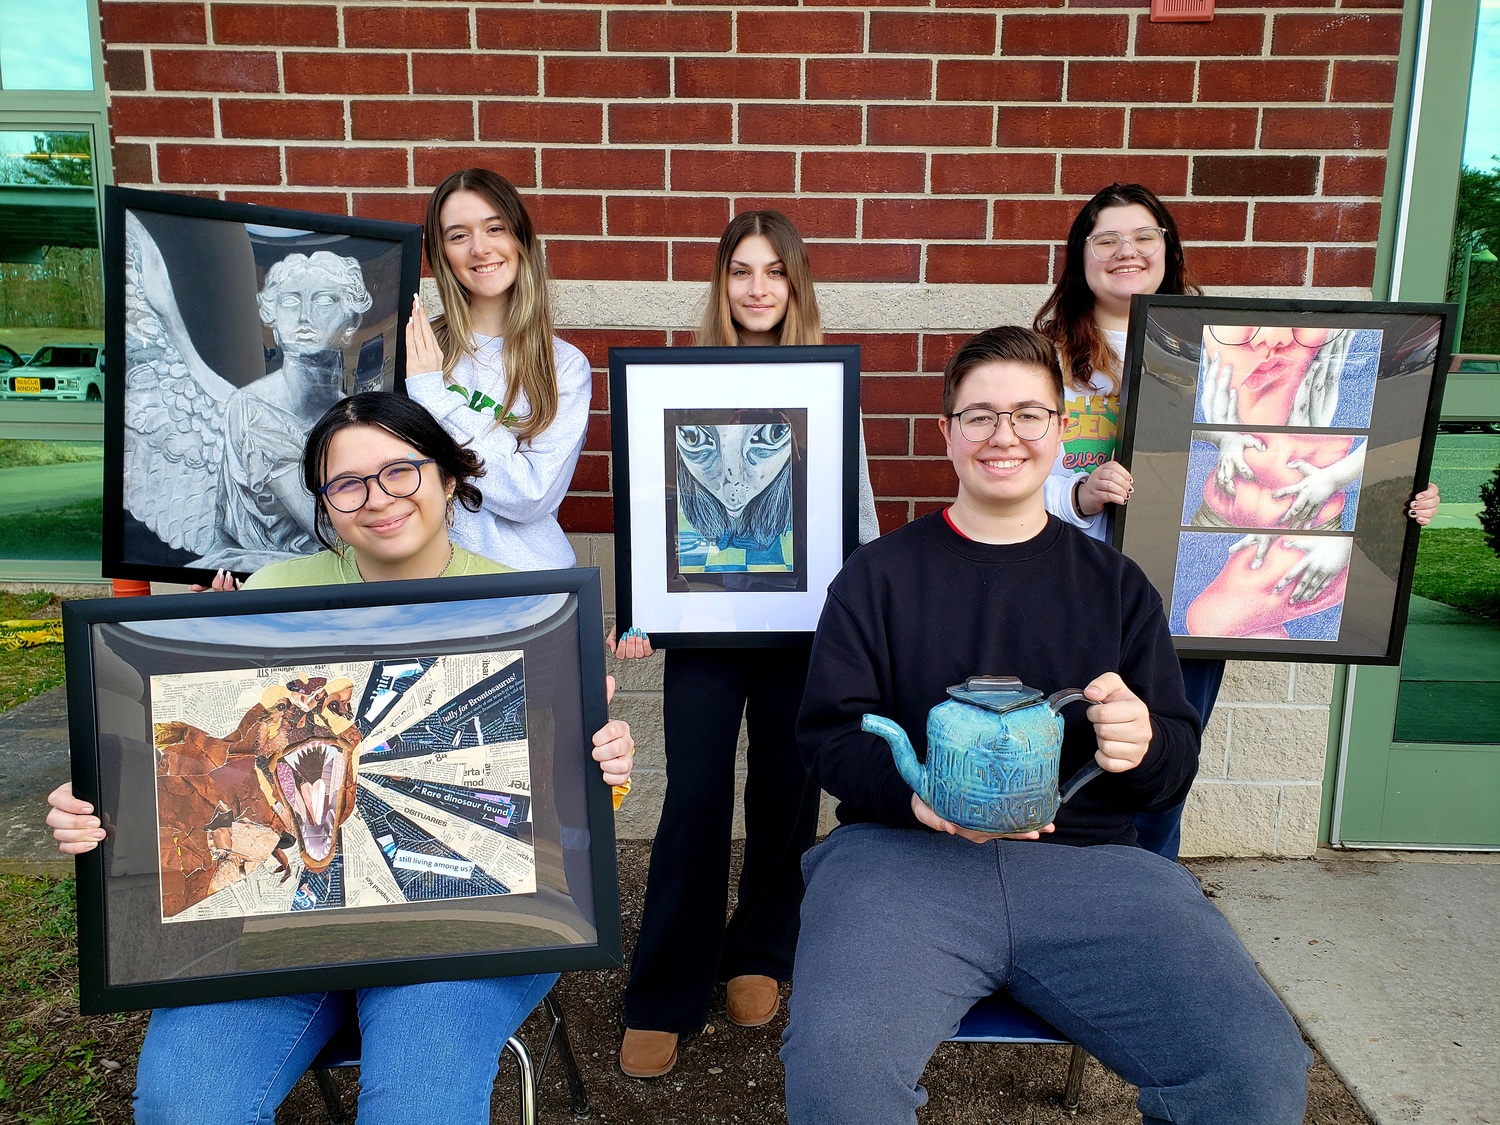 Eastport-South Manor Jr.-Sr. High School students Heather Moran, Alexandra Stefanidis, Grace Martin-Tsoupas, (front, l-r) Hailey Reilley and James Kreiling were selected to exhibit at Bay Area Friends of Fine Art's annual high school juried invitational art exhibit in Sayville. COURTESY EASTPORT-SOUTH MANOR SCHOOL DISTRICT